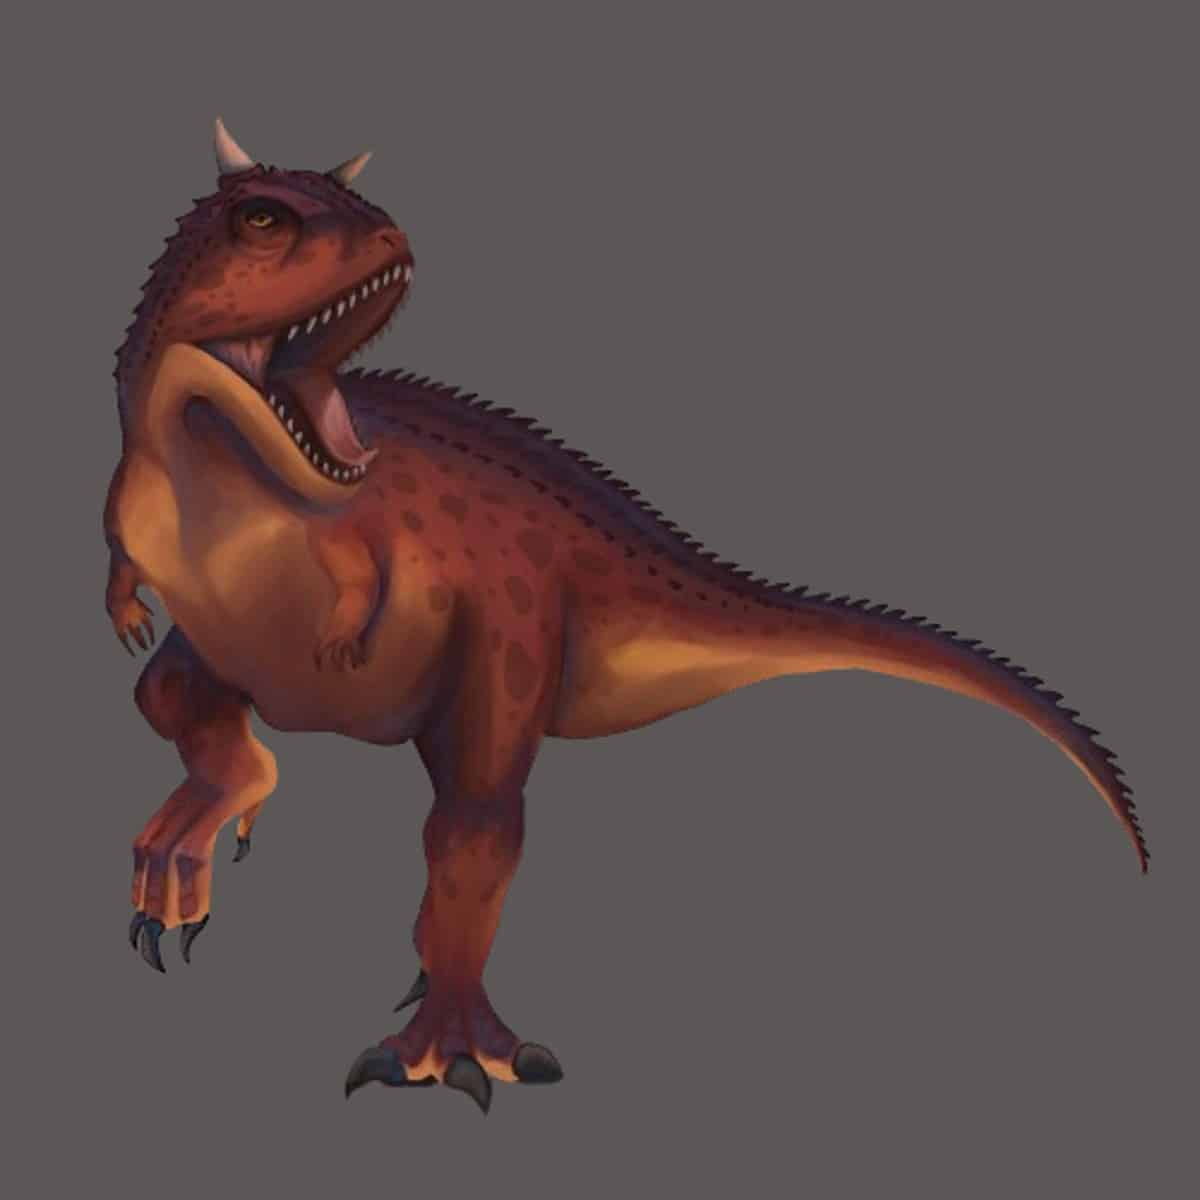 Carnotaurus | Fierce Horned Predator of the Late Cretaceous. Carnotaurus was a fascinating dinosaur from the Late Cretaceous. Discover its origins, unique features, and the environment it thrived in.